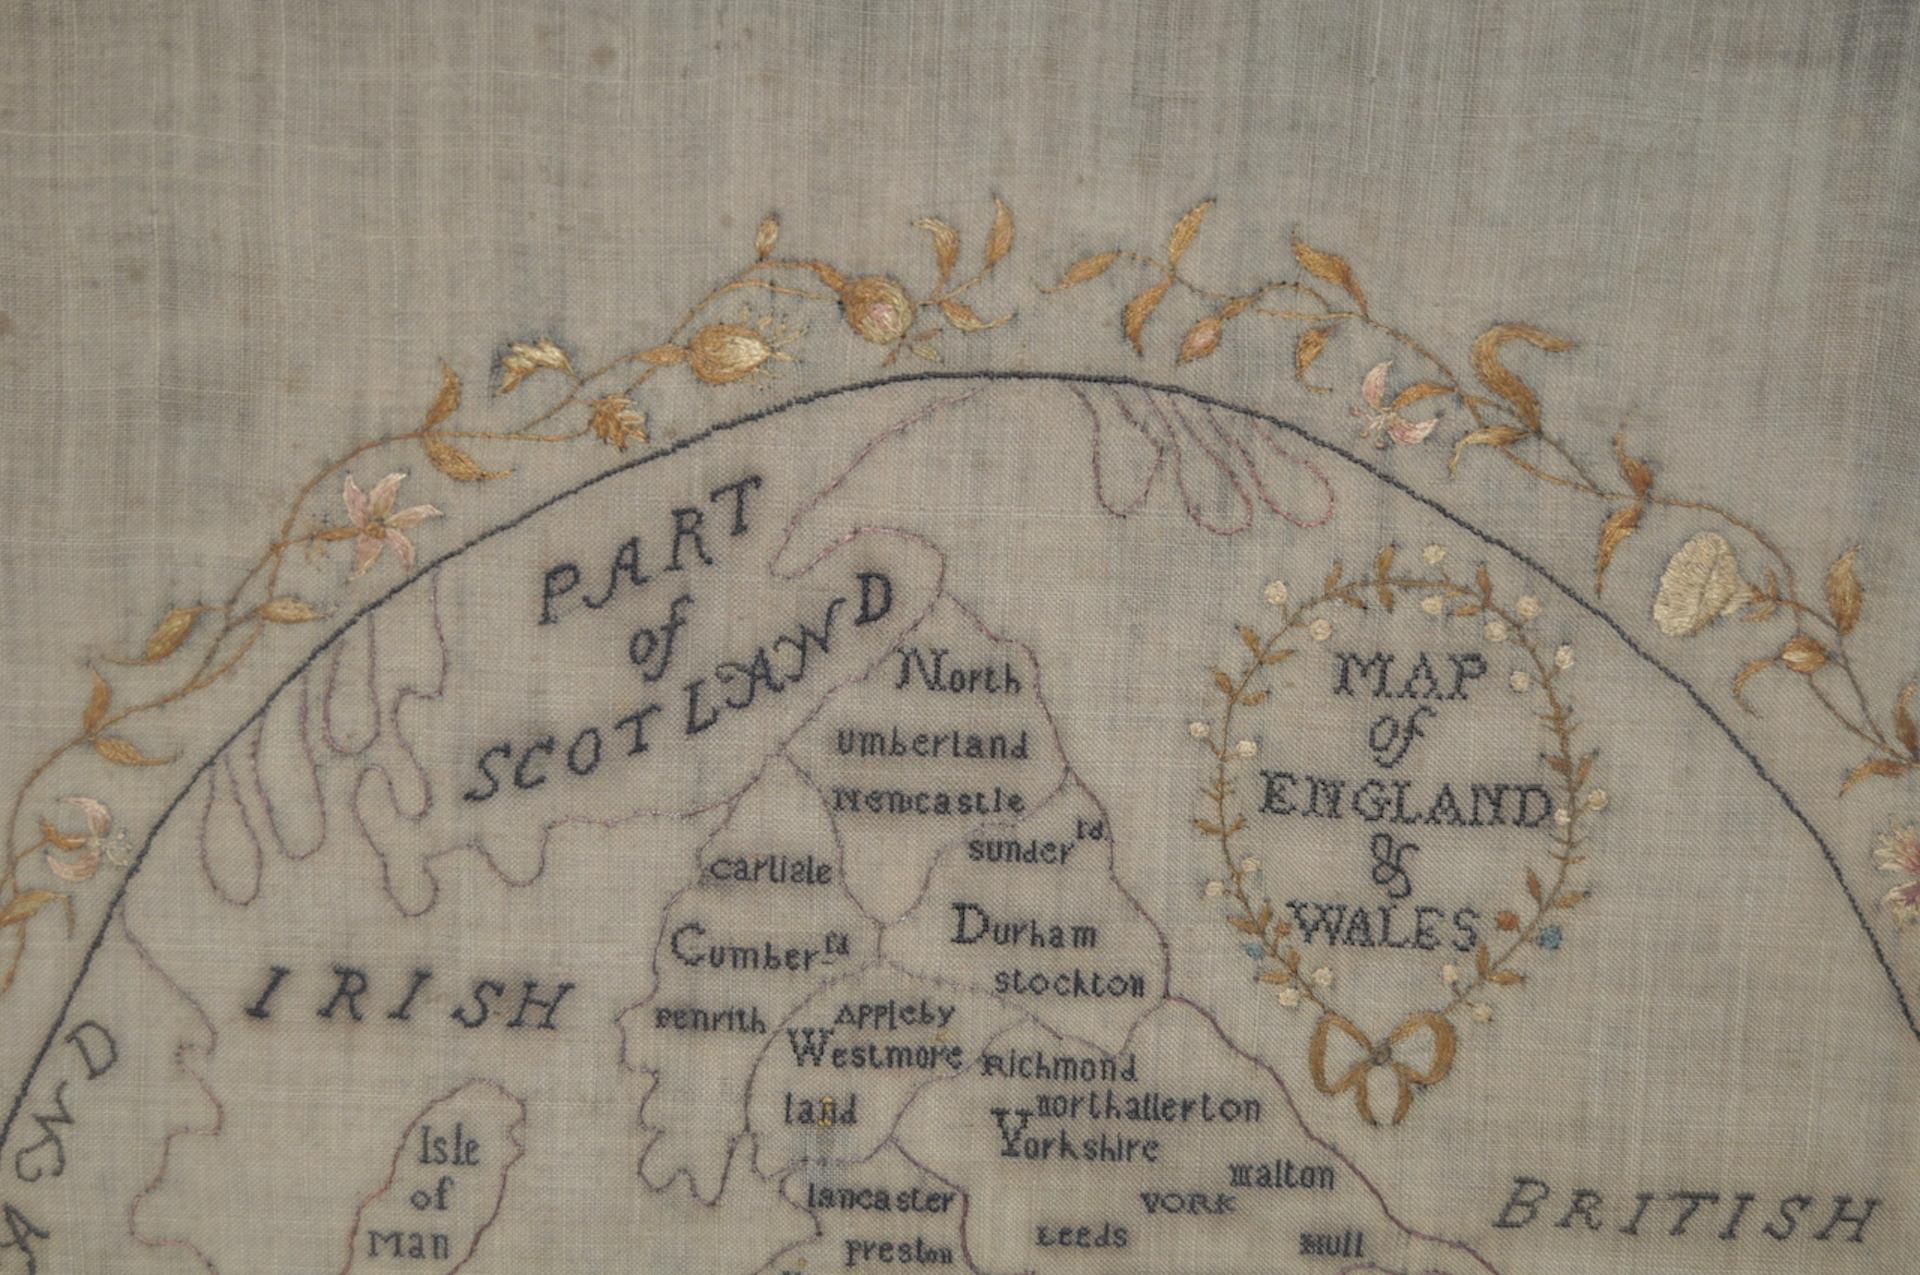 Map of England and Wales early 19th century sampler

Superb early to mid-19th century sampler done by a very patient and talented hand.

A map of England and Wales embroidered on silk. Very detailed. Very good antique condition.

Dimensions: